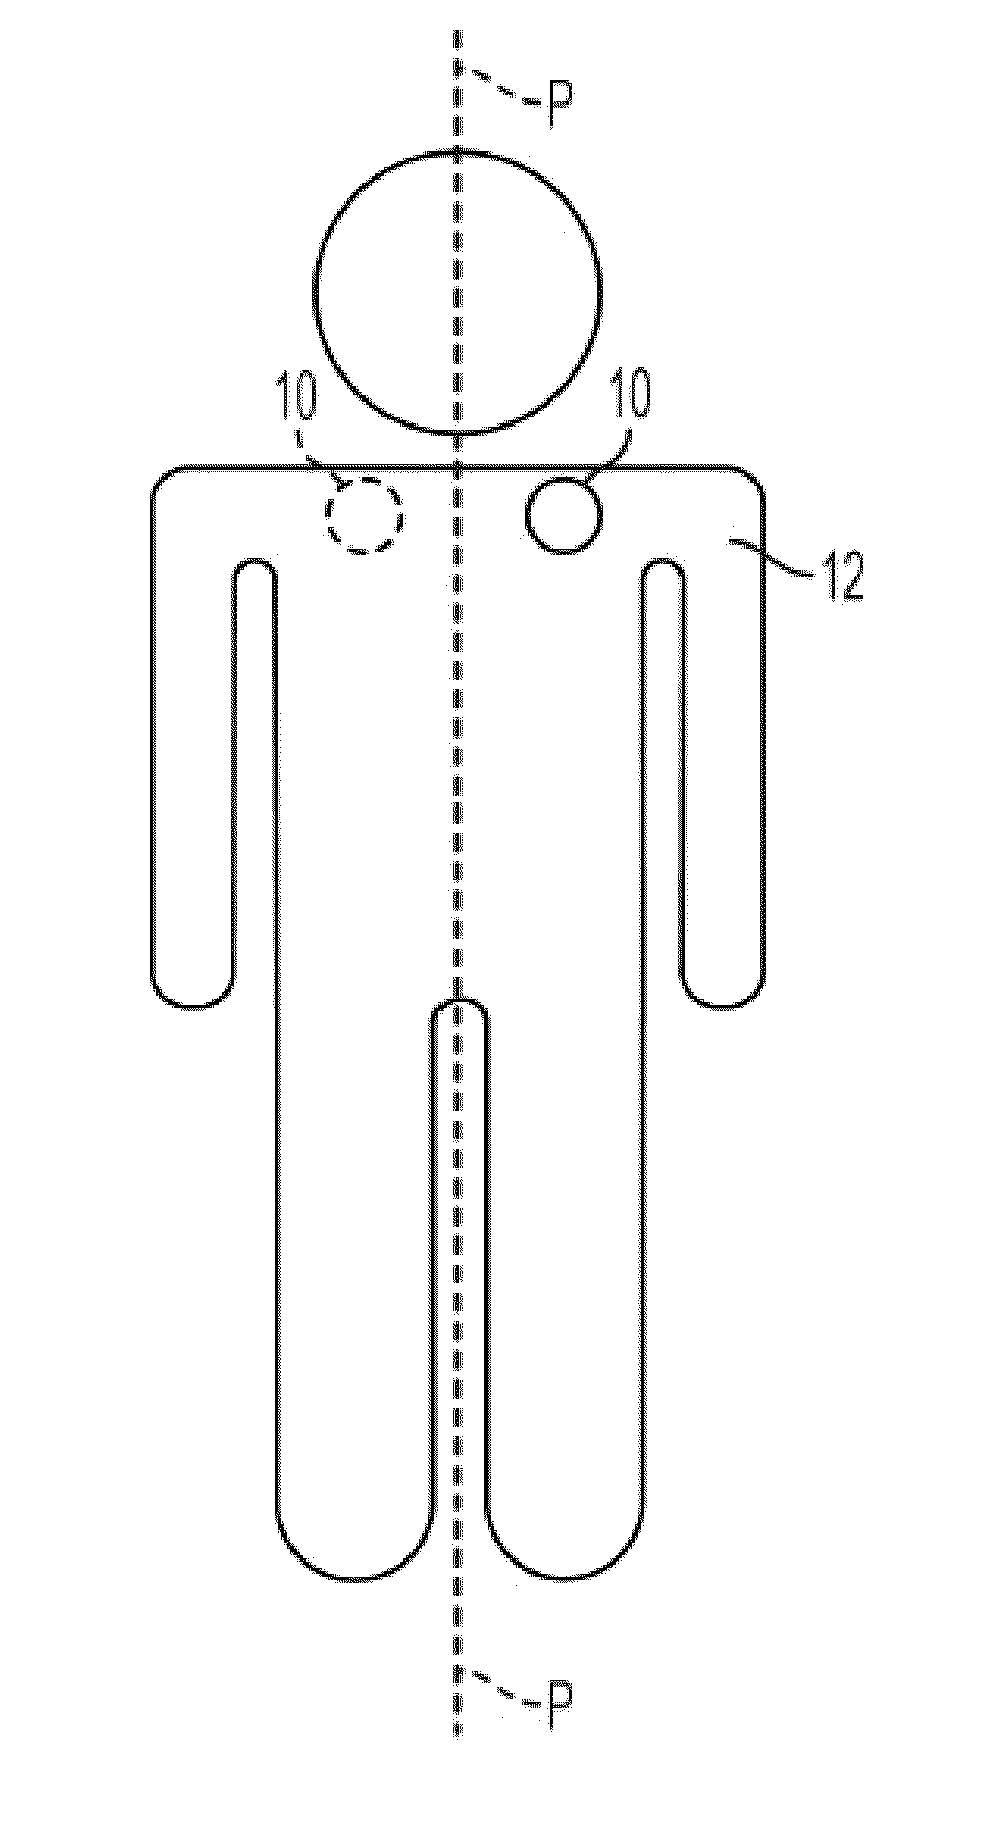 Methods and Devices for Activating Brown Adipose Tissue Using Electrical Energy